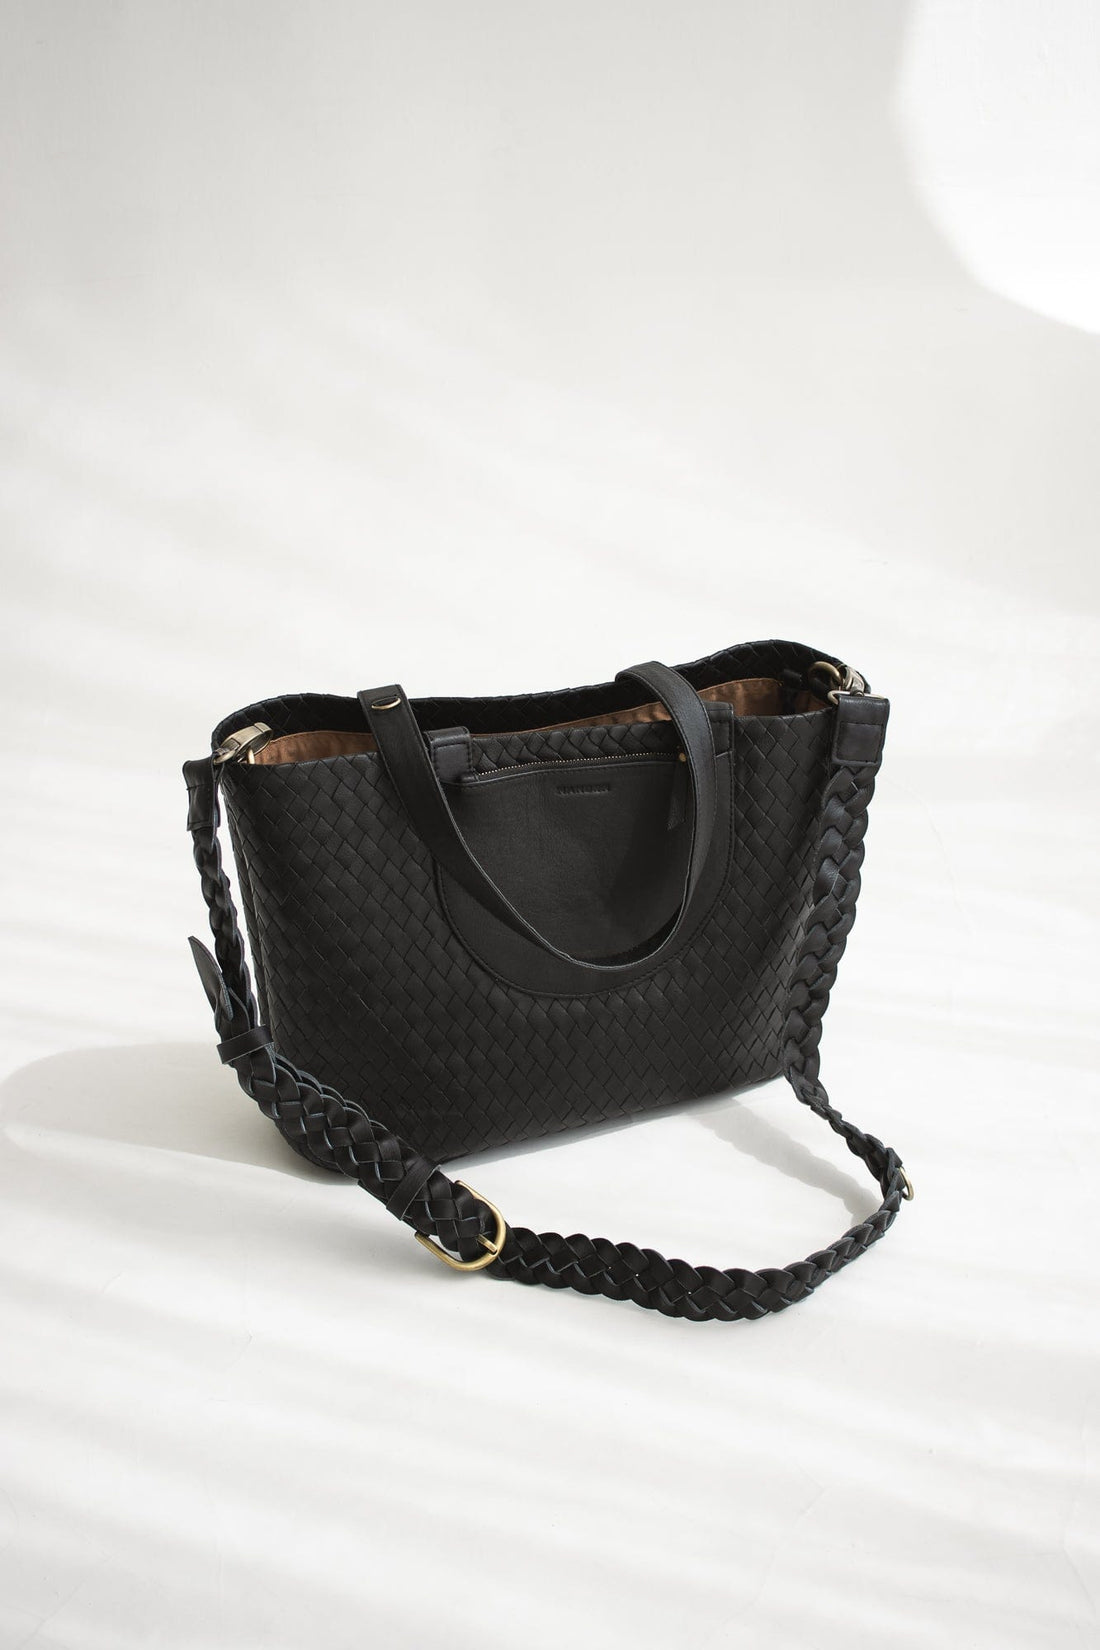 MANDRN  The Carry - Tan Woven Leather Strap